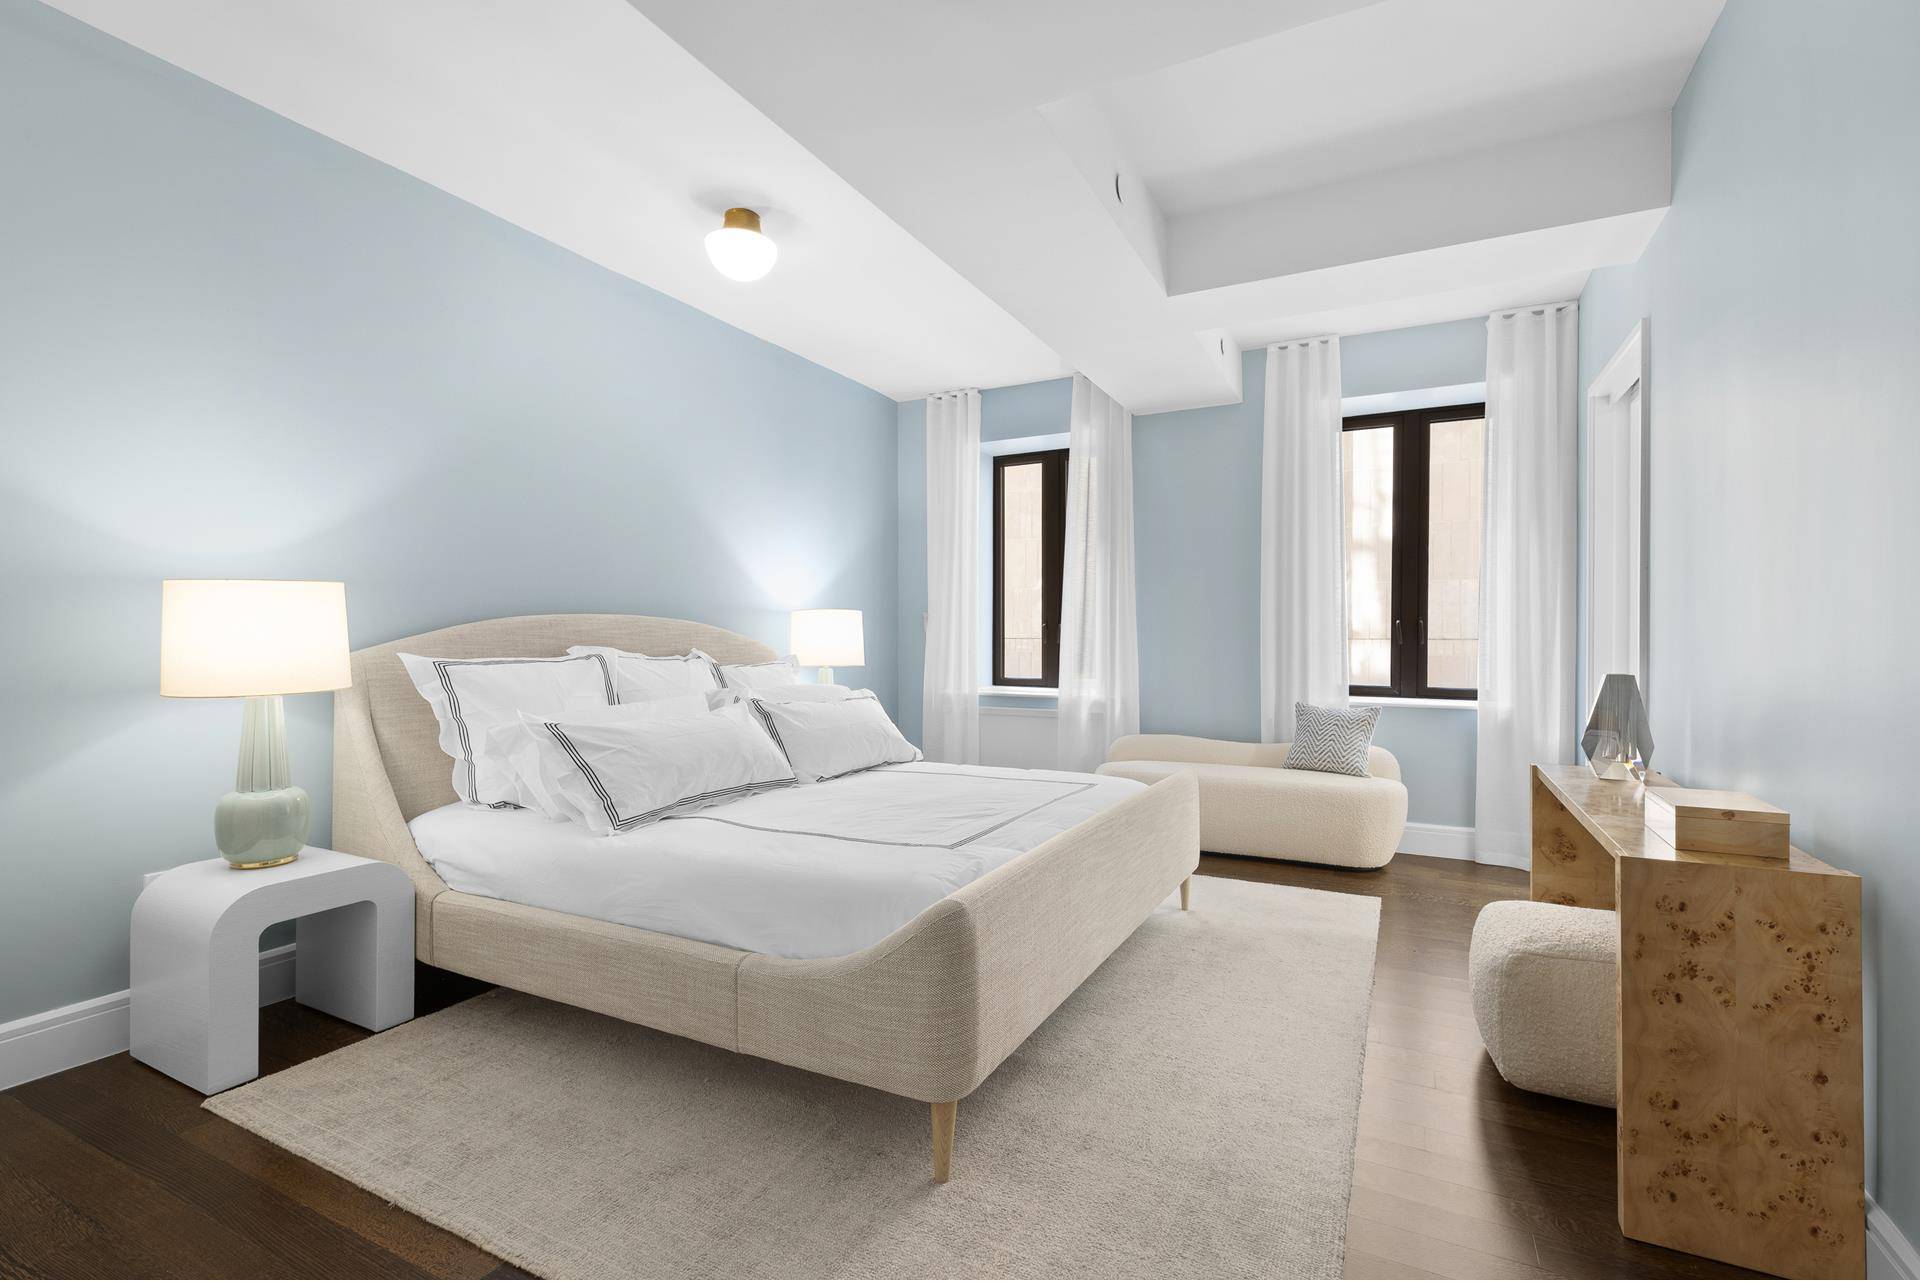 IMMEDIATE OCCUPANCY. Comprising just eight full floor residences, 220 East 20th Street offers exceptionally discreet living within Gramercy Square.